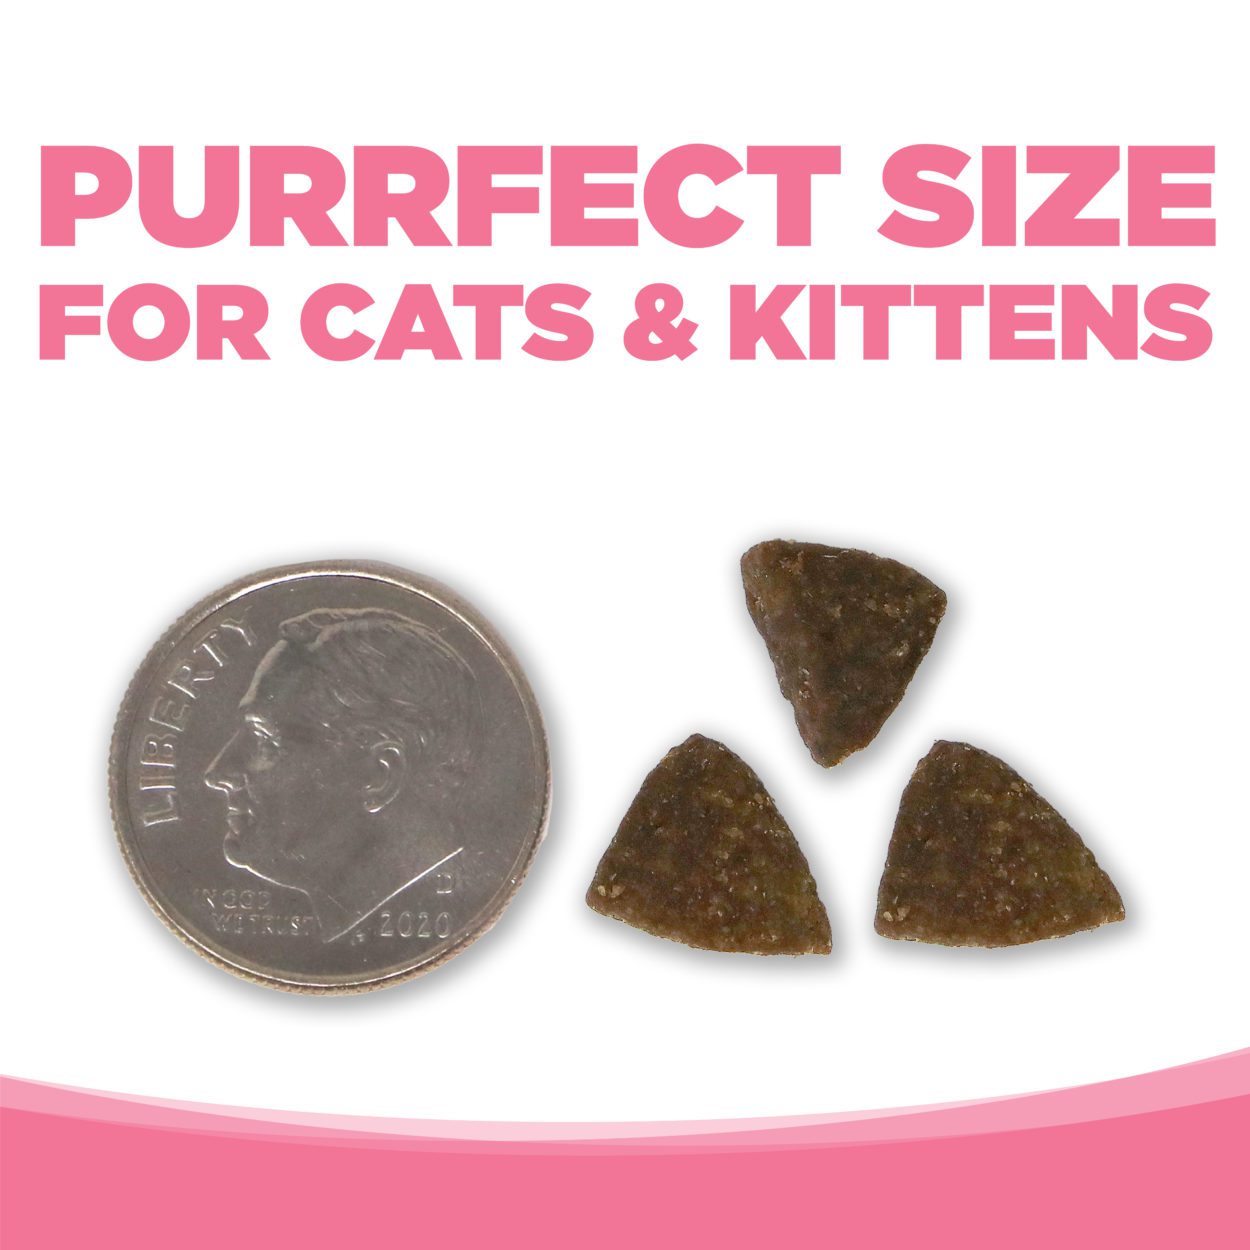 PURRFECT SIZEE FOR CATS & KITTENS